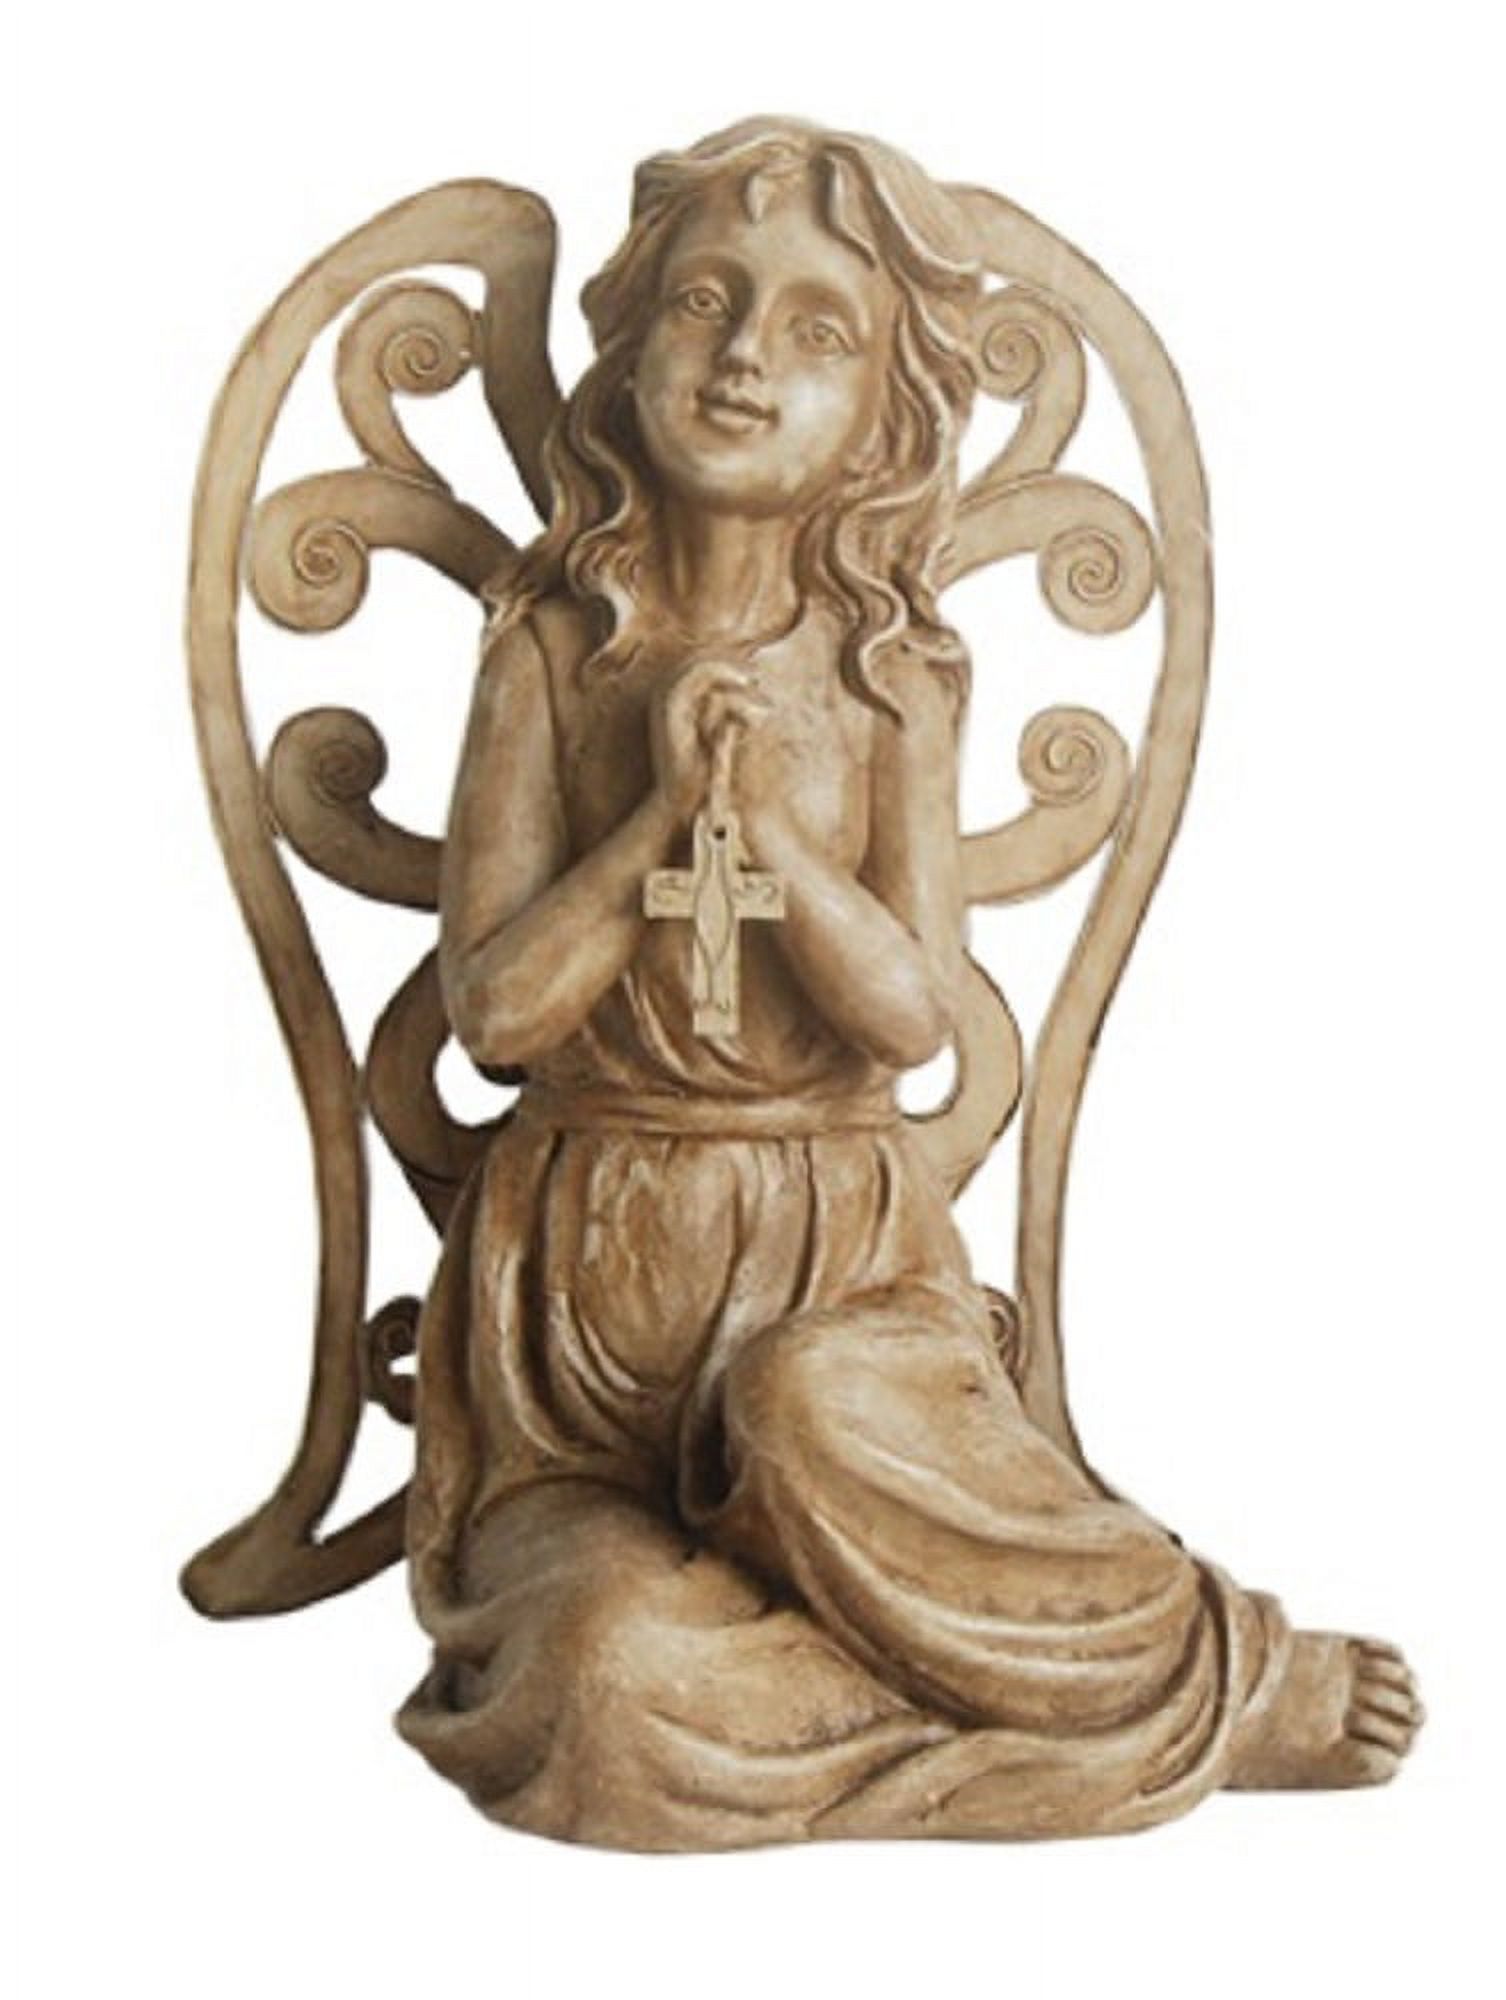 Northlight 14.5" Sitting Angel with Cross Garden Statue Outdoor Decoration - Brown - image 1 of 3